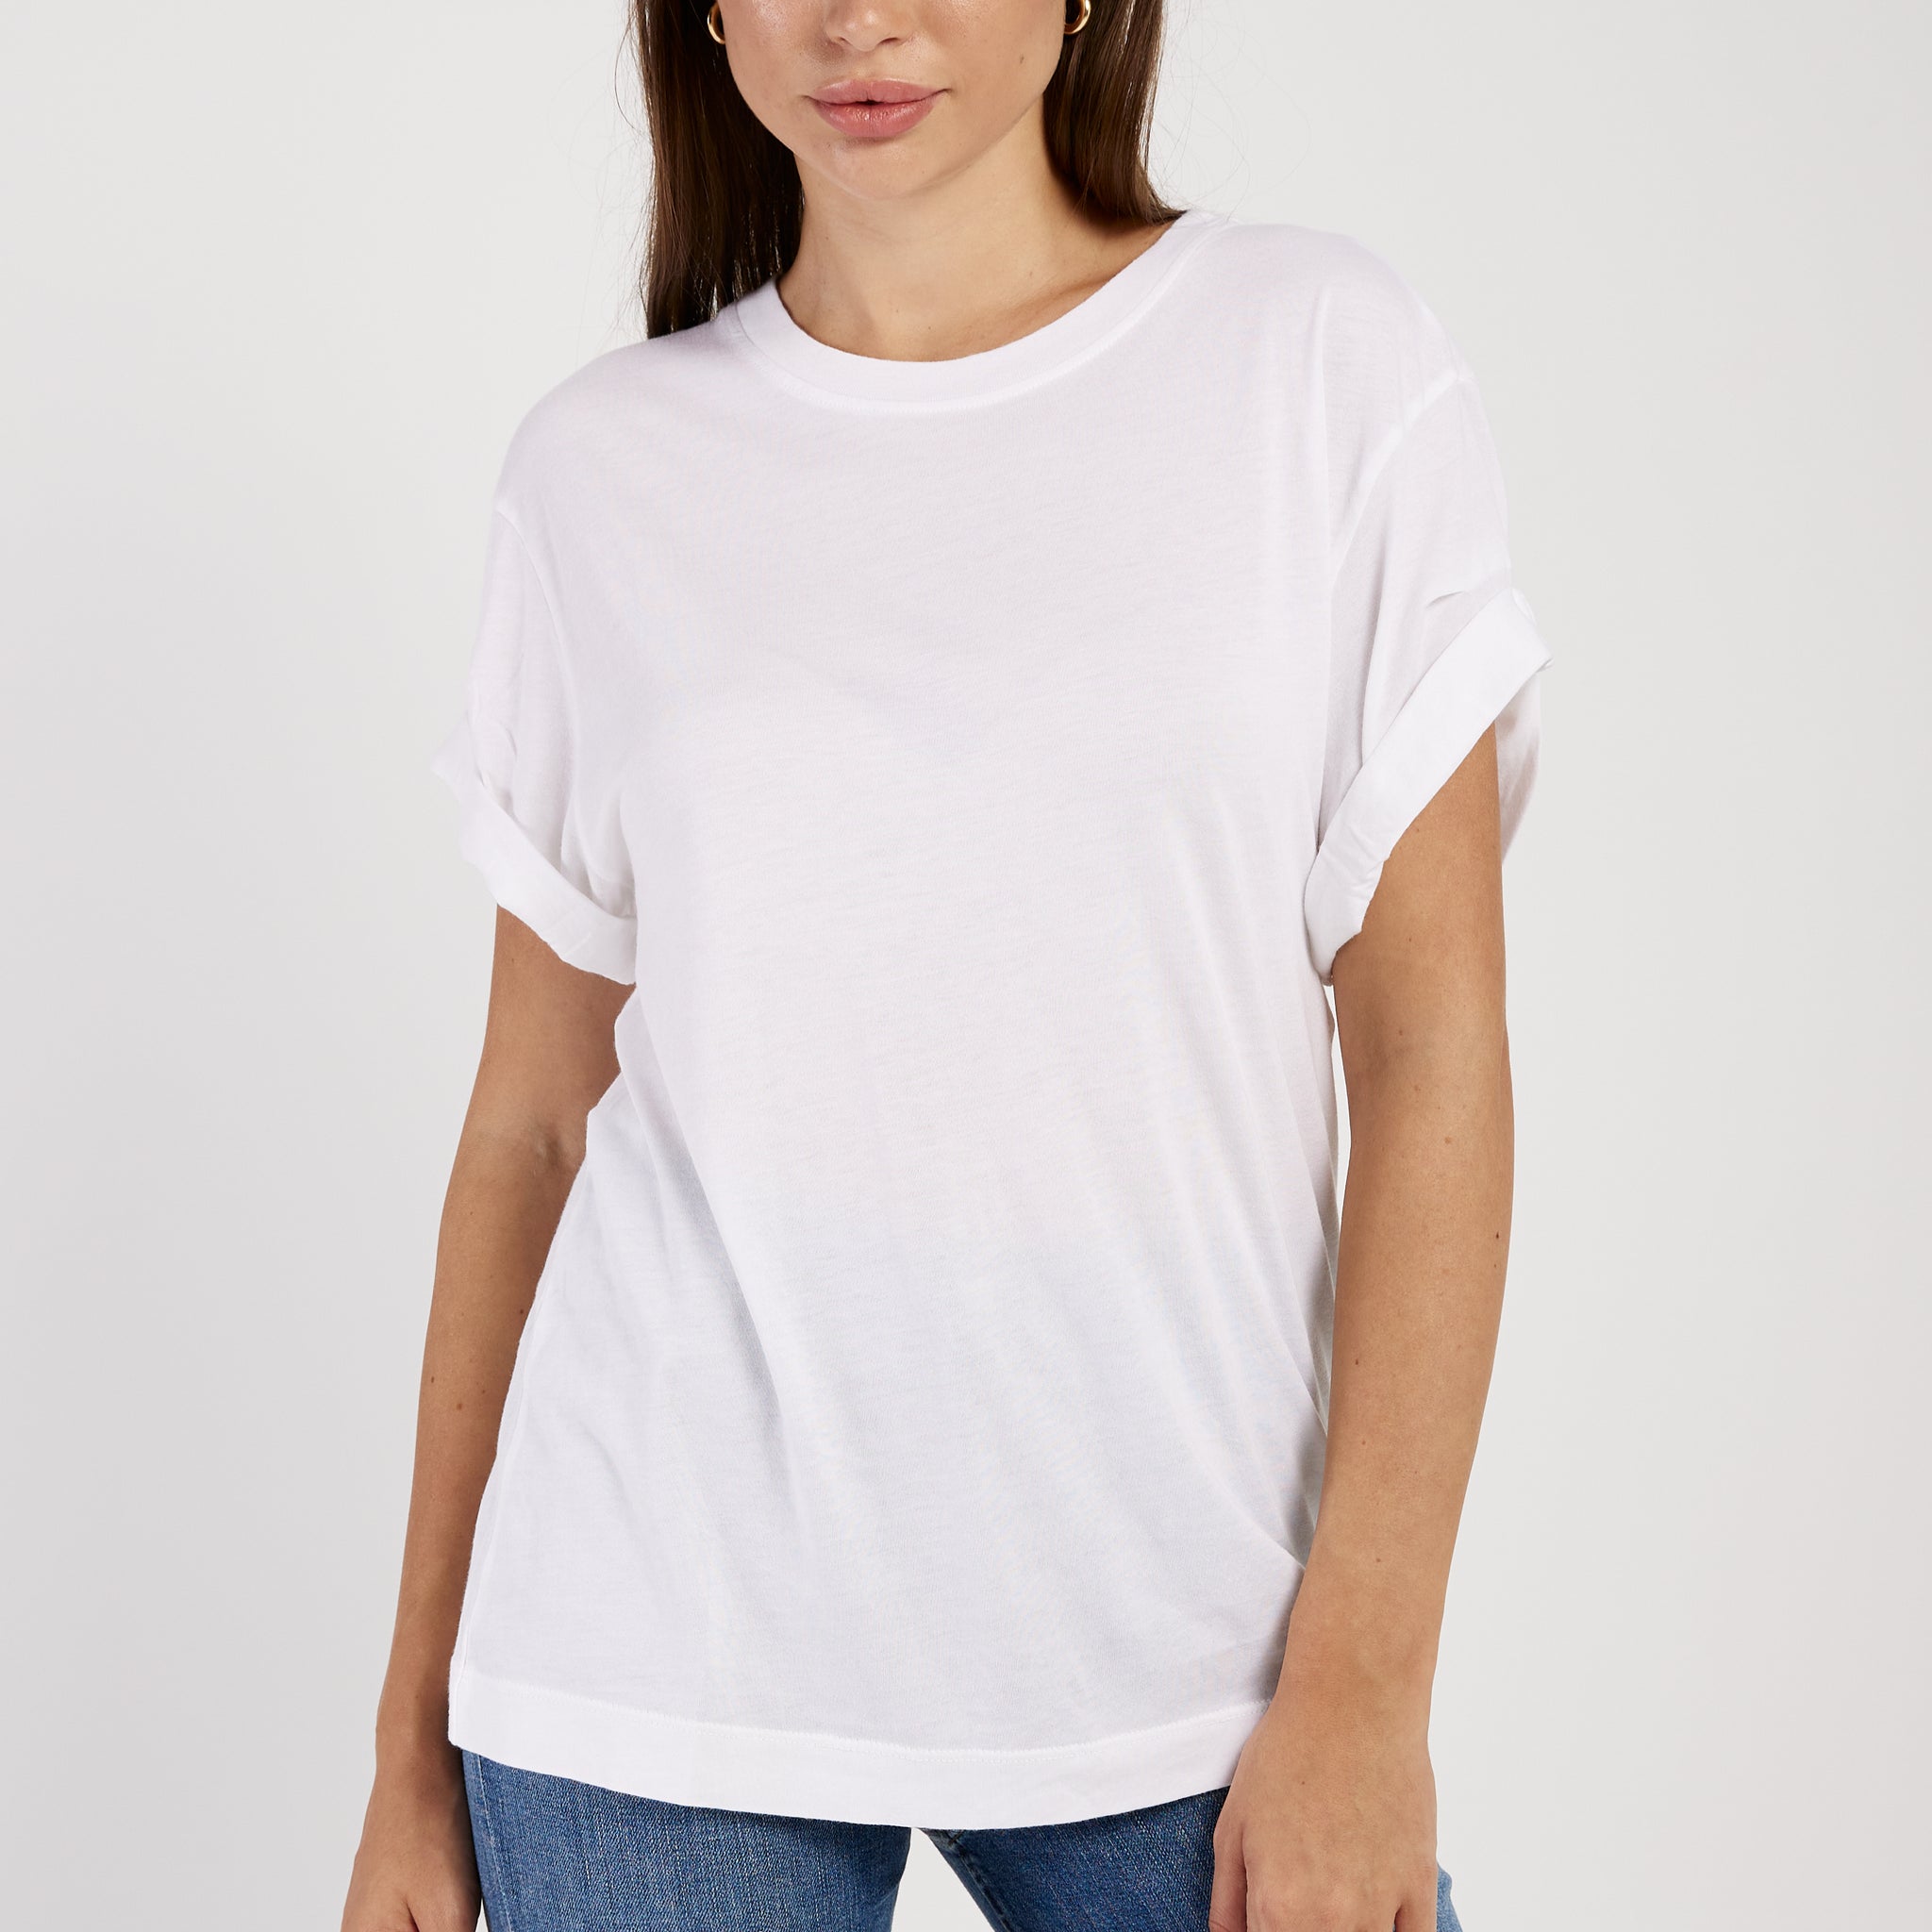 CITIZENS OF HUMANITY Lupita T-Shirt in White